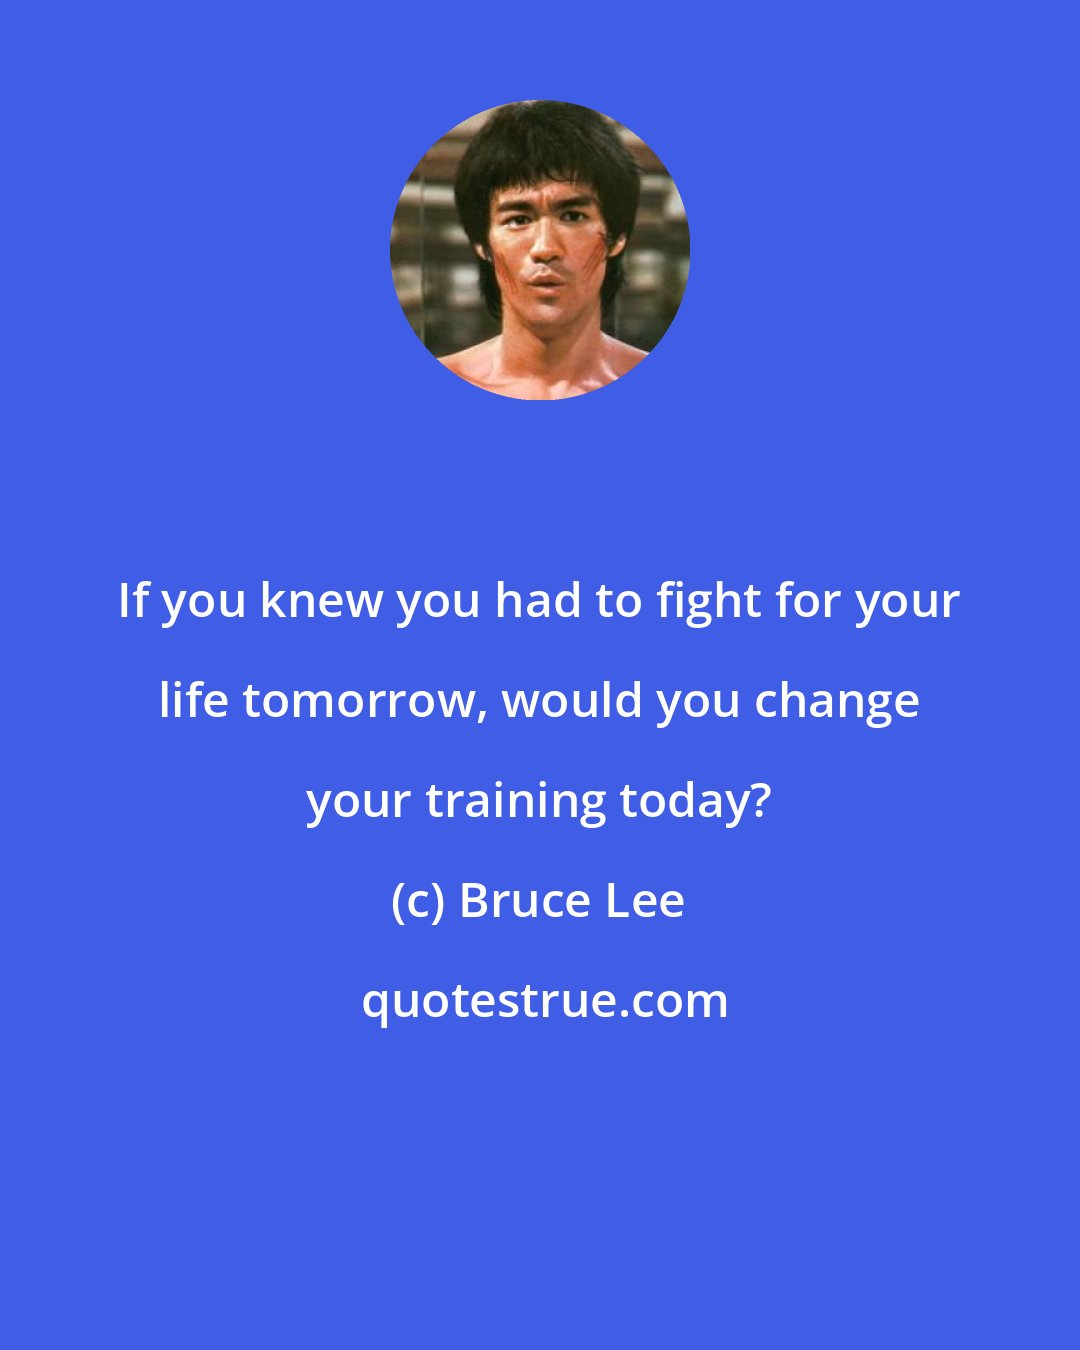 Bruce Lee: If you knew you had to fight for your life tomorrow, would you change your training today?